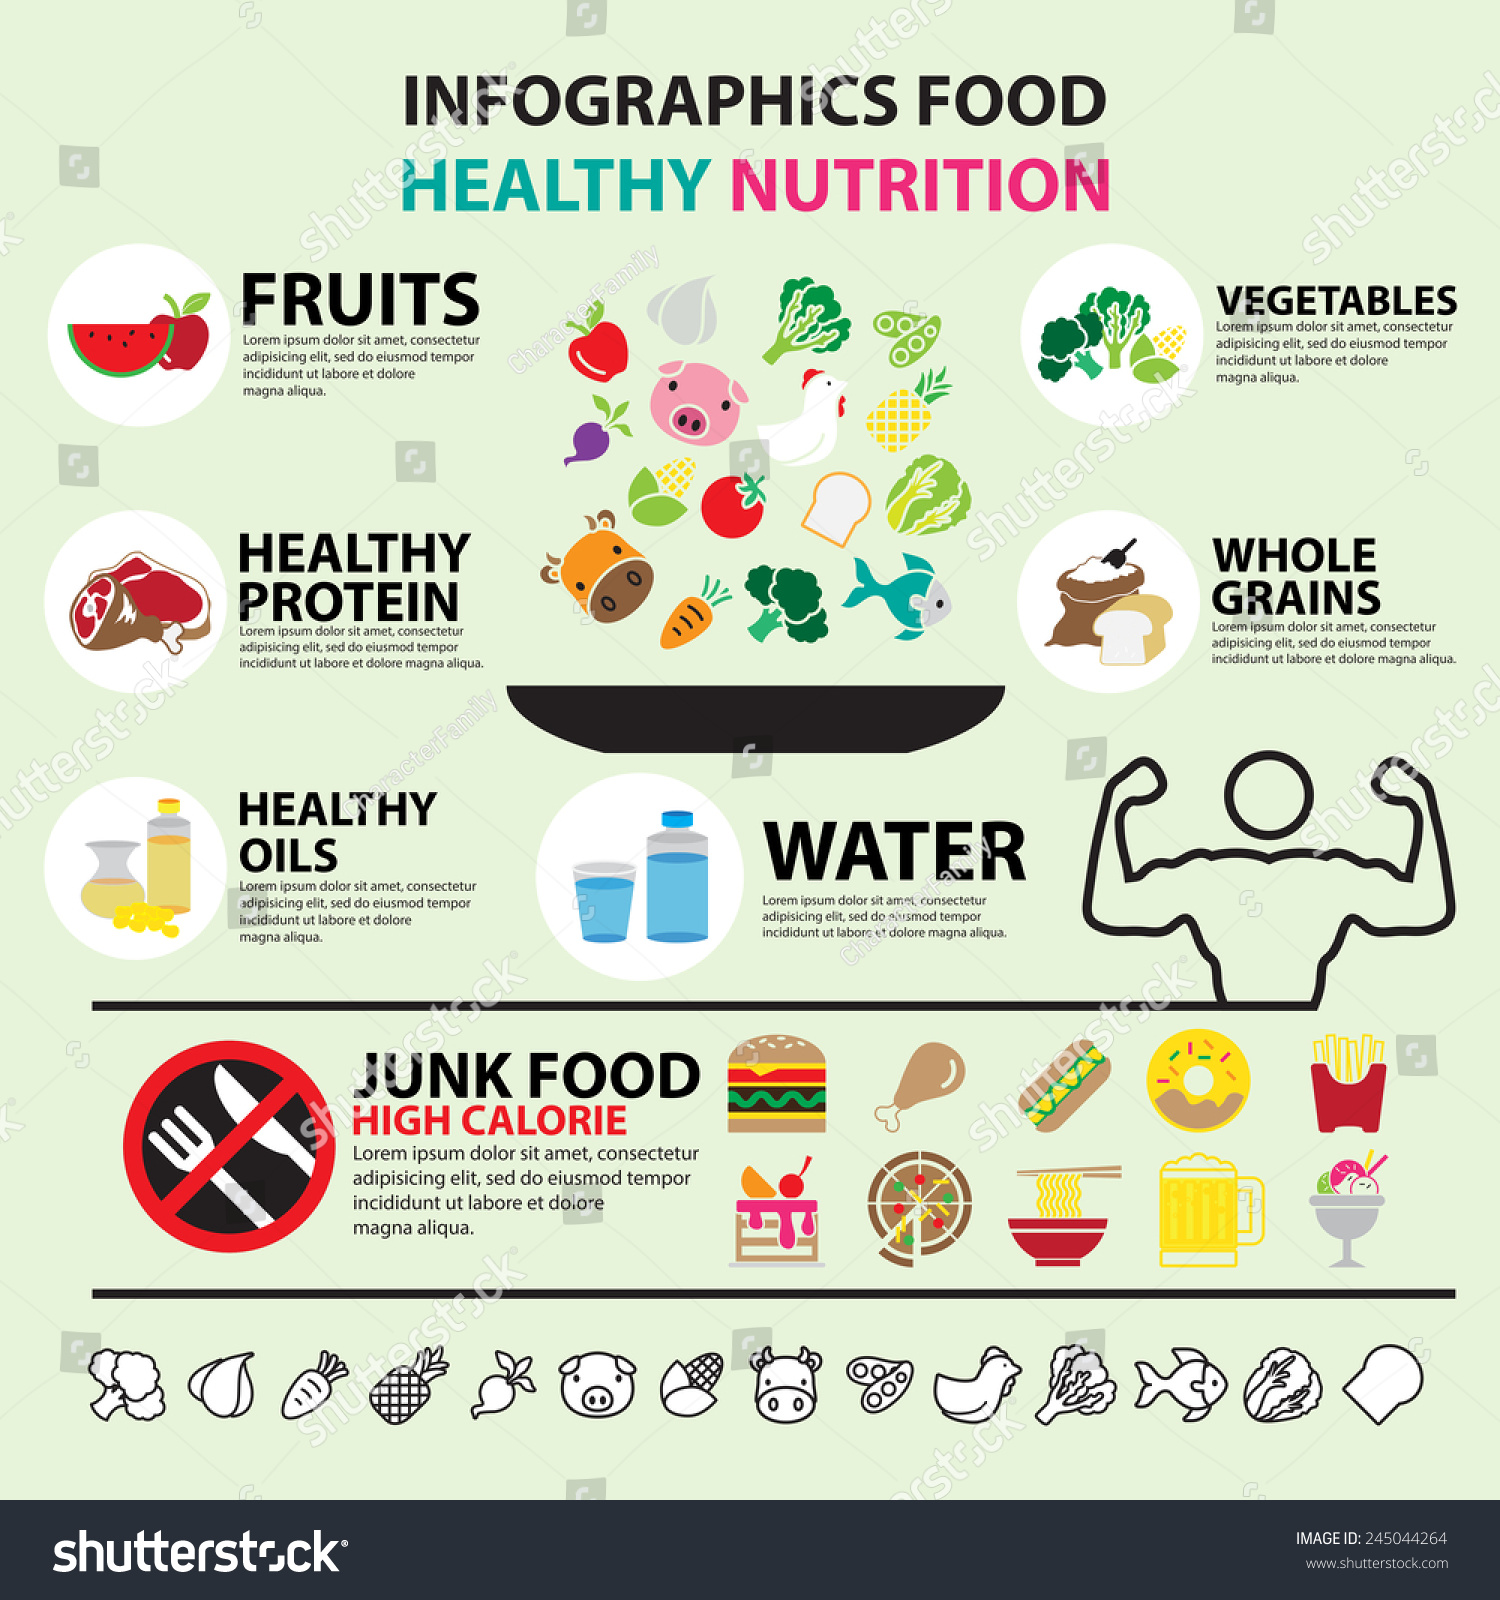 Infographic Food Healthy Nutrition Stock Vector 245044264 - Shutterstock